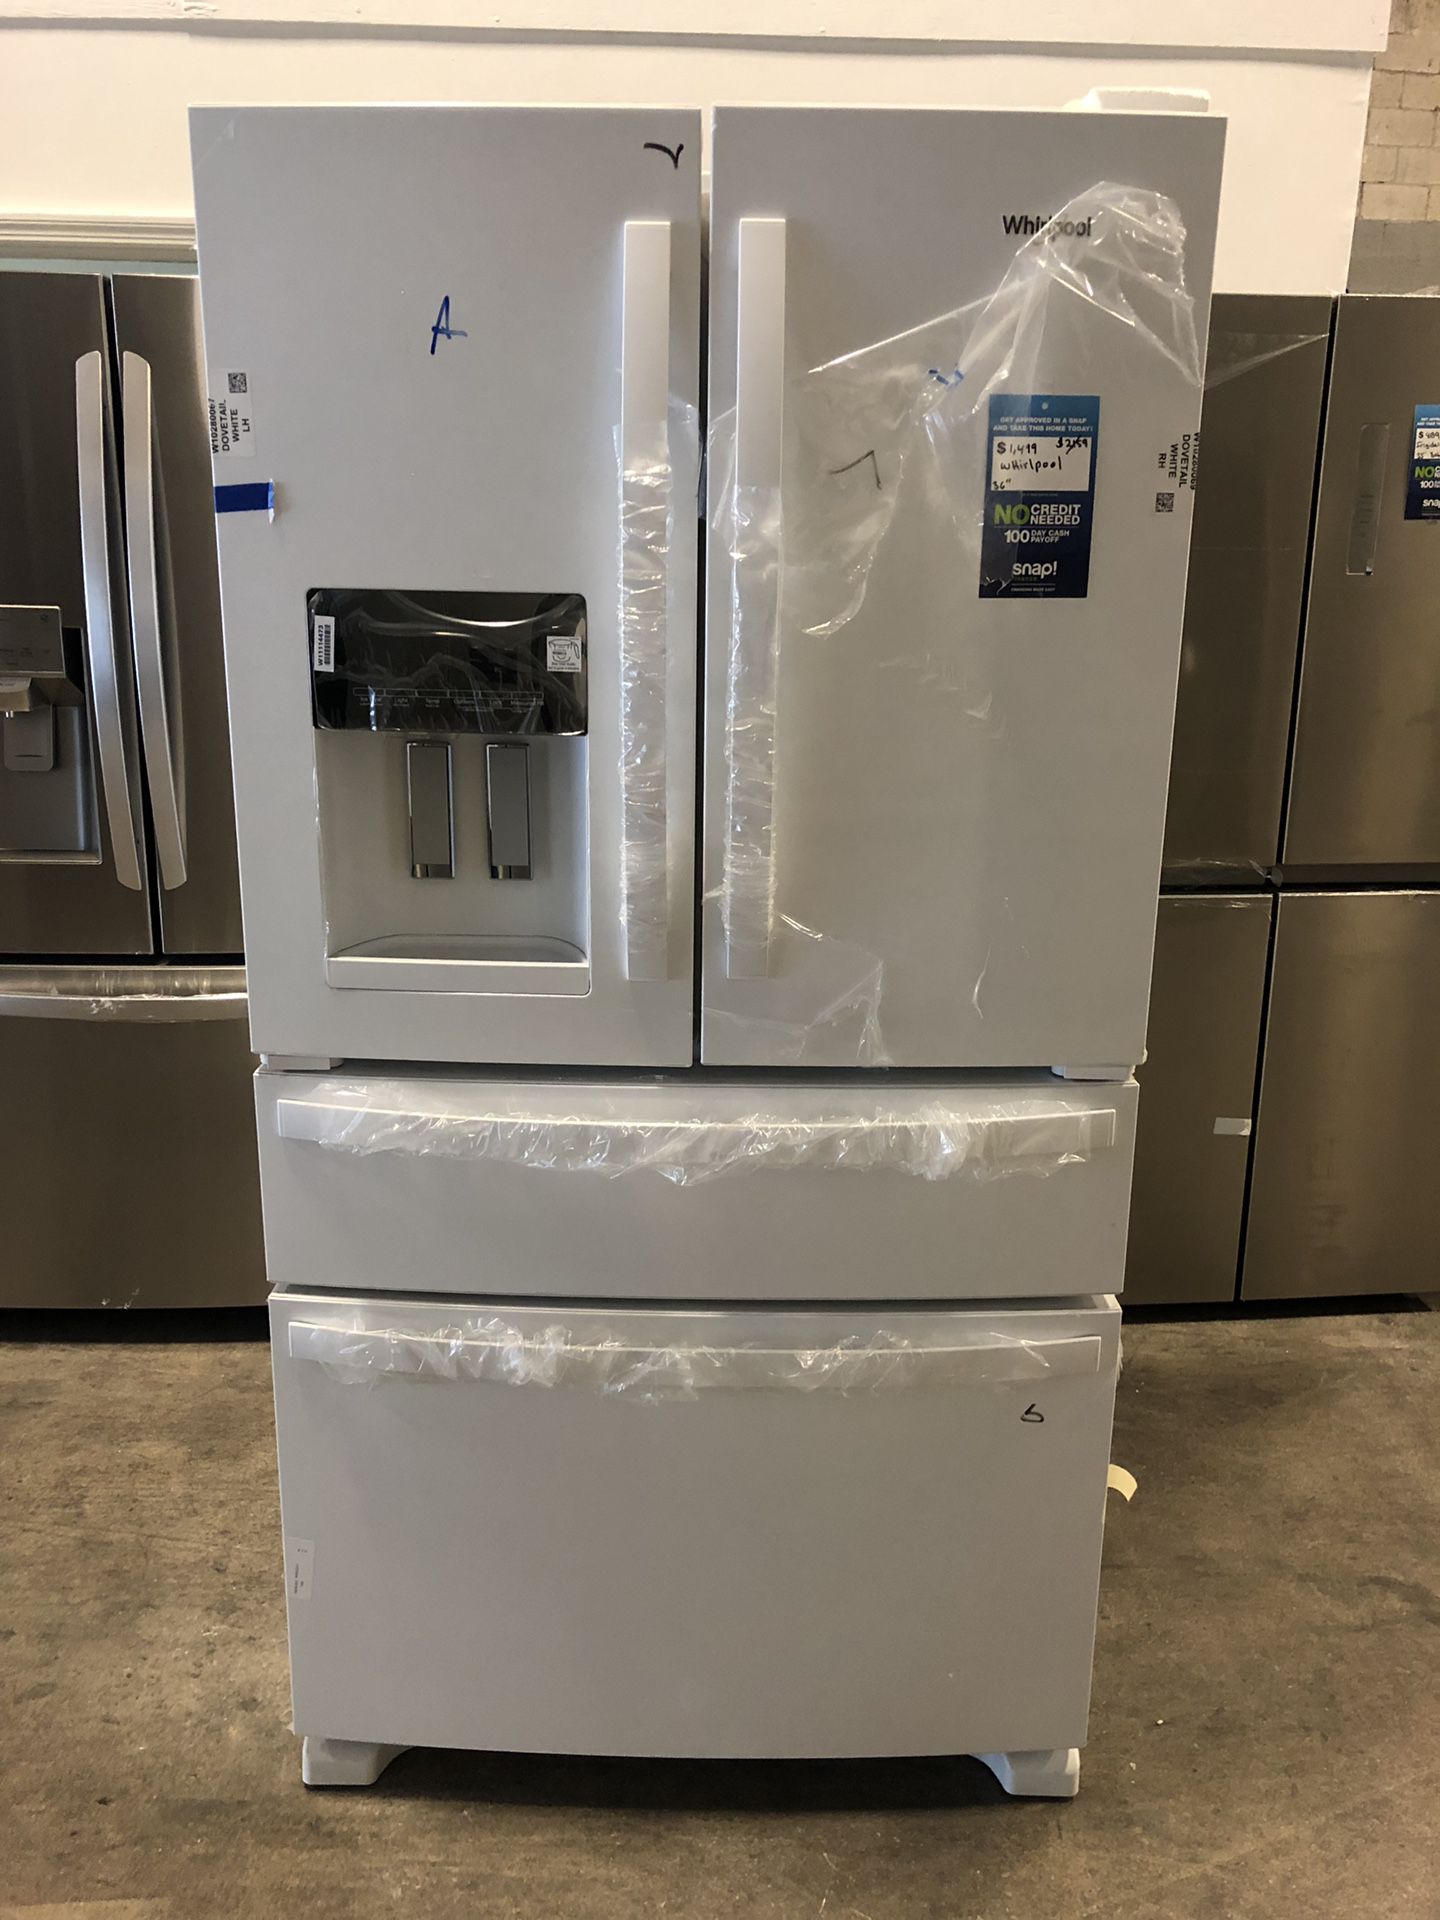 Whirlpool-24.5 cu. Ft. 4 Door French Door Refrigerator take home for $39 EZ financing available with 1 year warranty